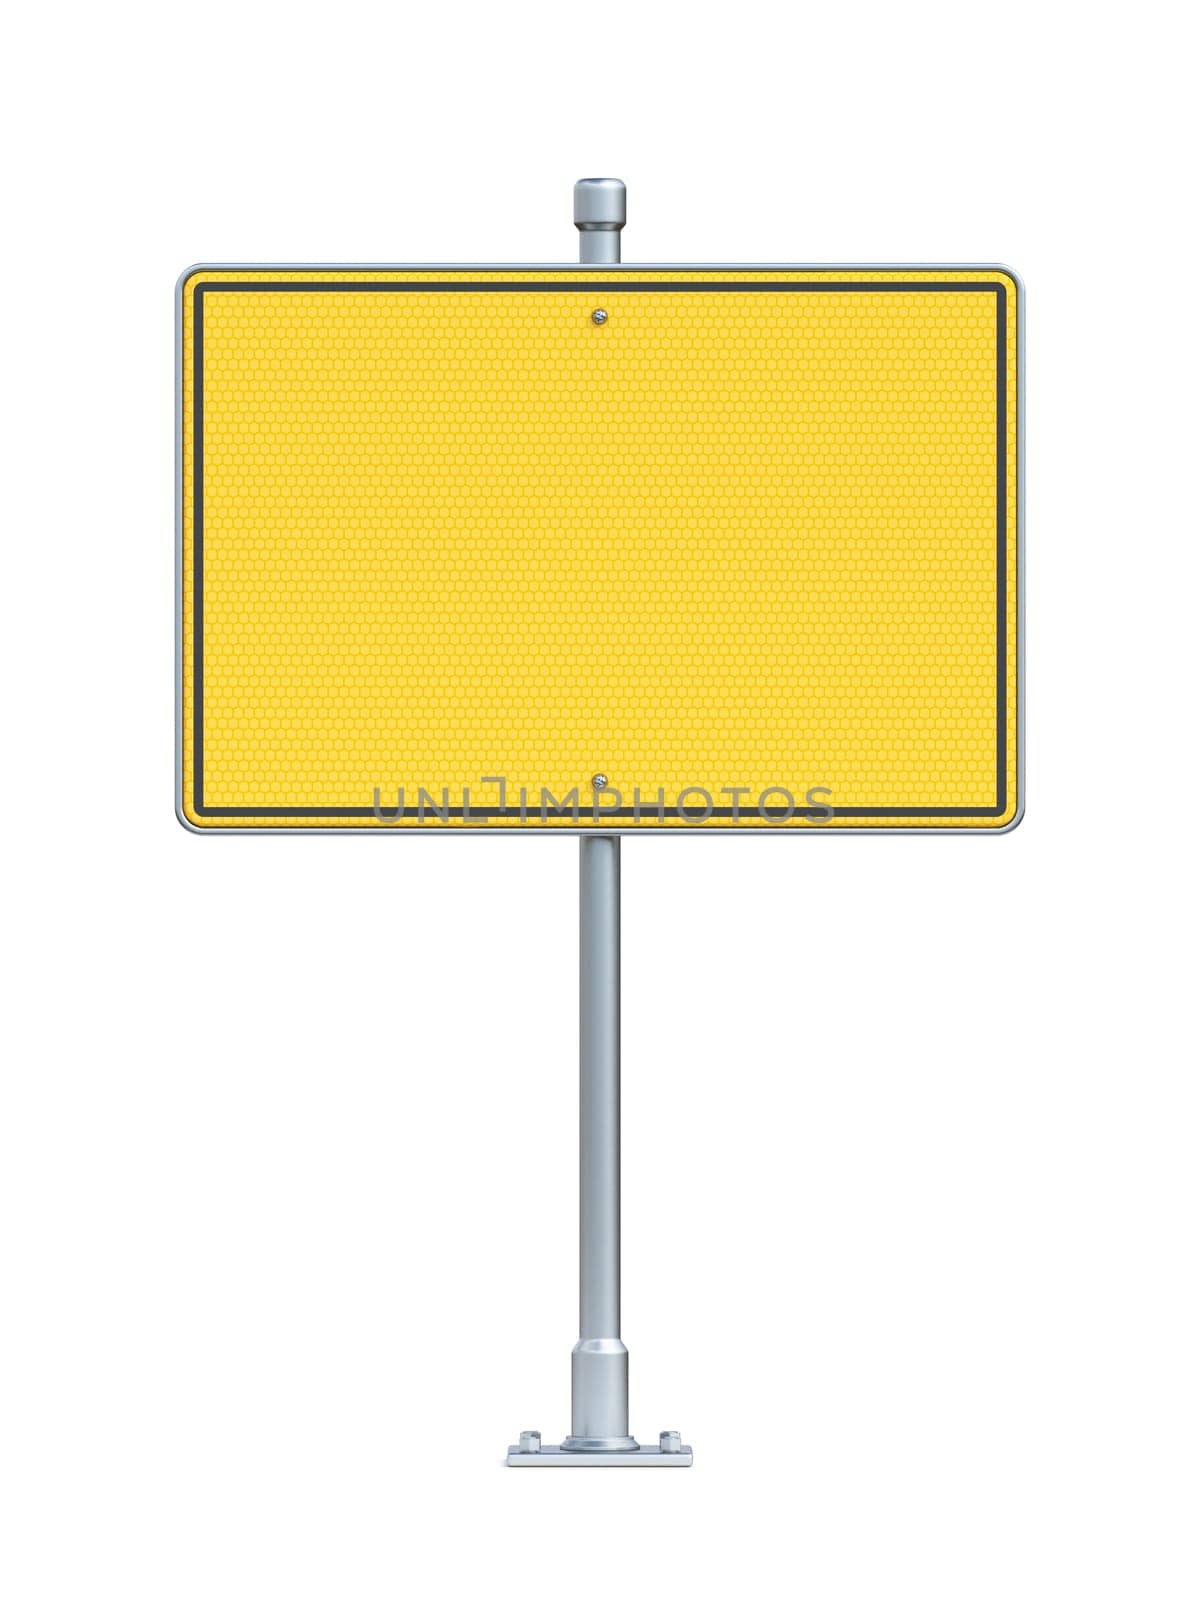 Blank yellow traffic sign board 3D rendering illustration isolated on white background